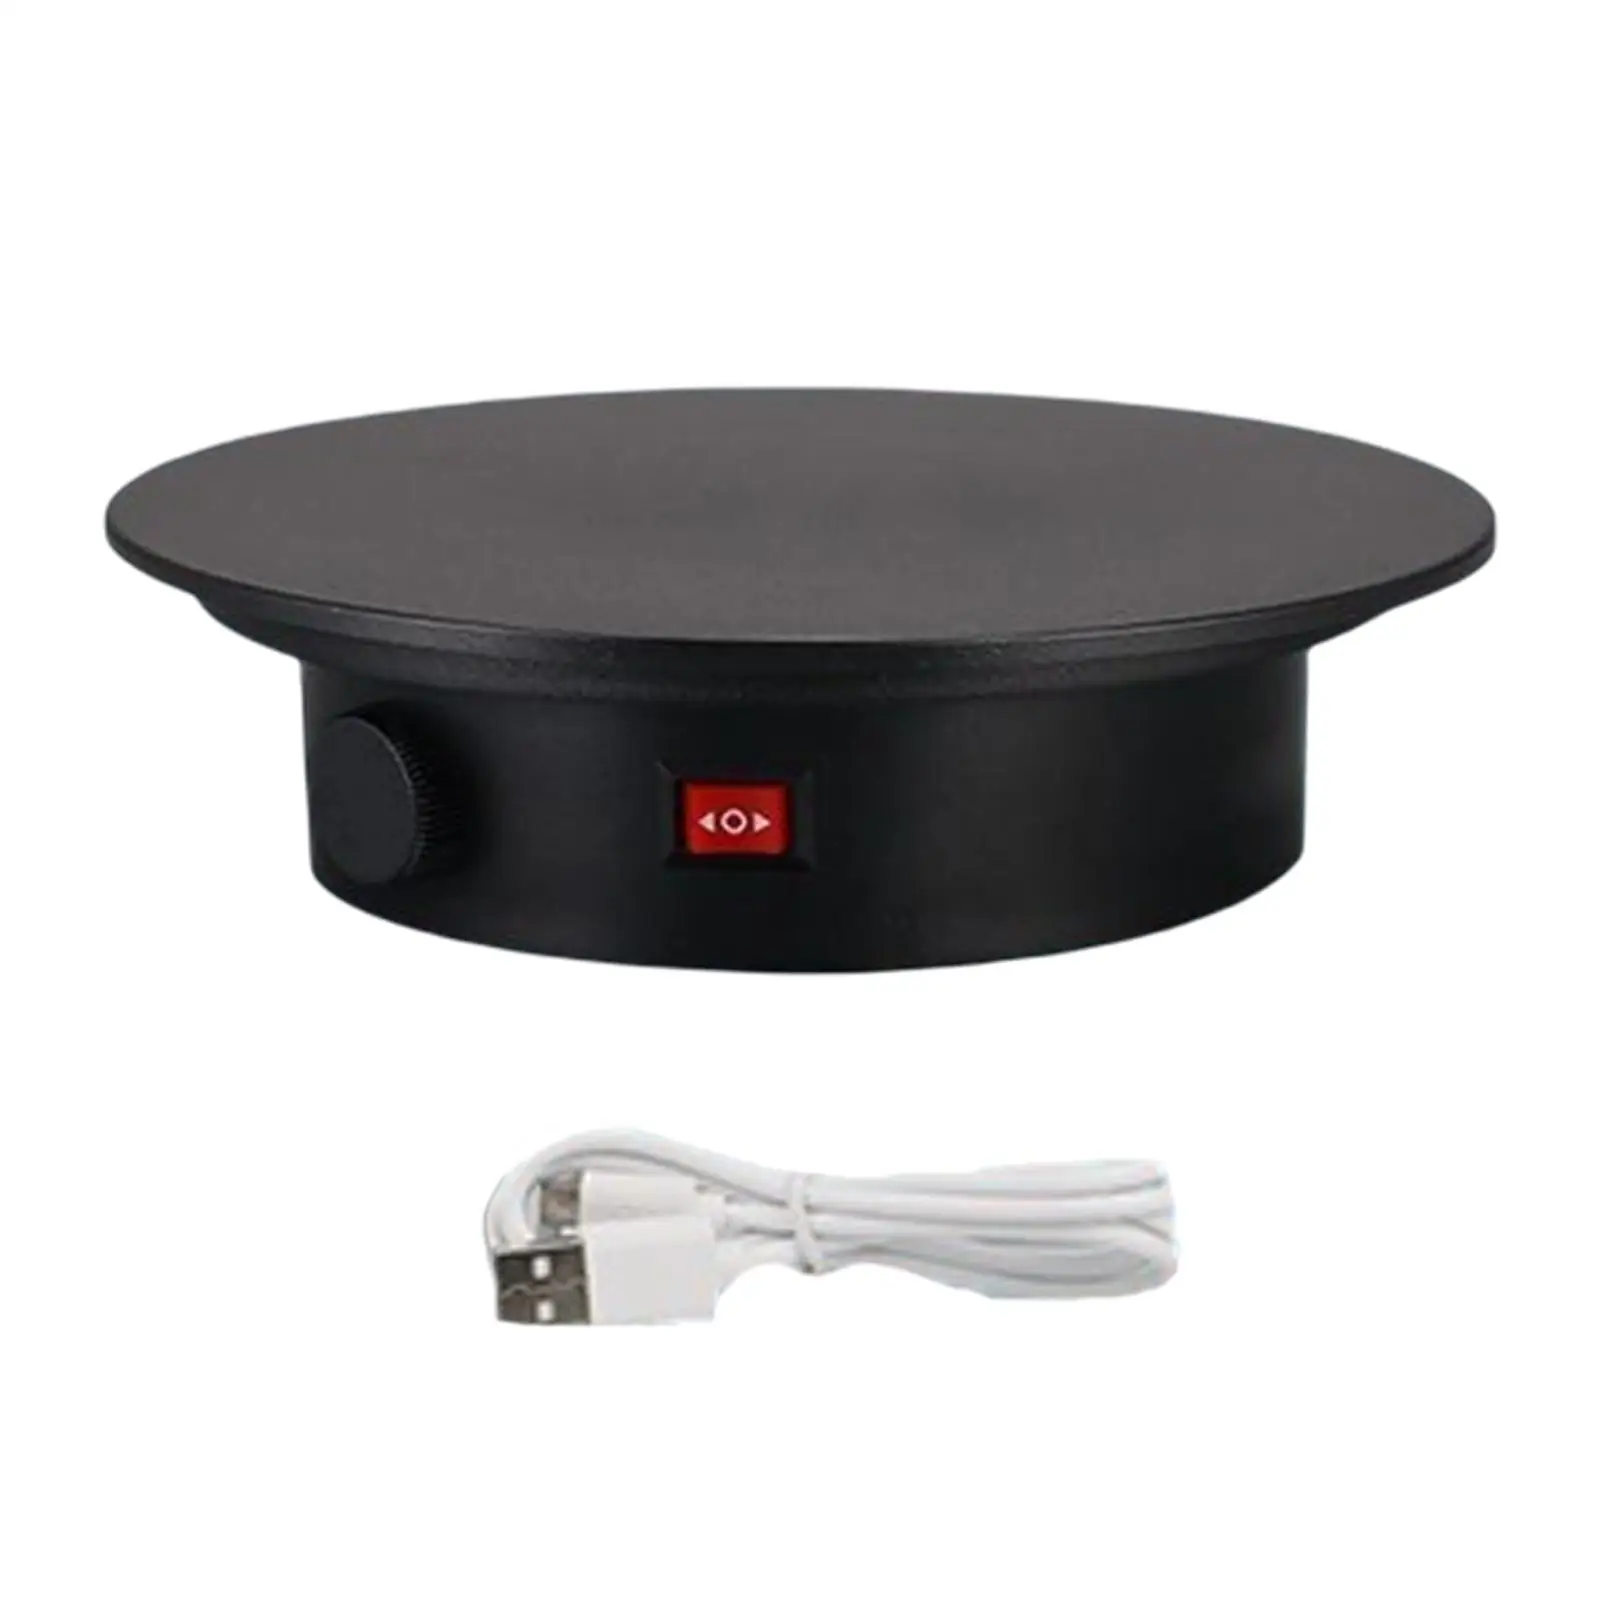 360 Degree Rotating Display Stand Display Table for Photography Live Video